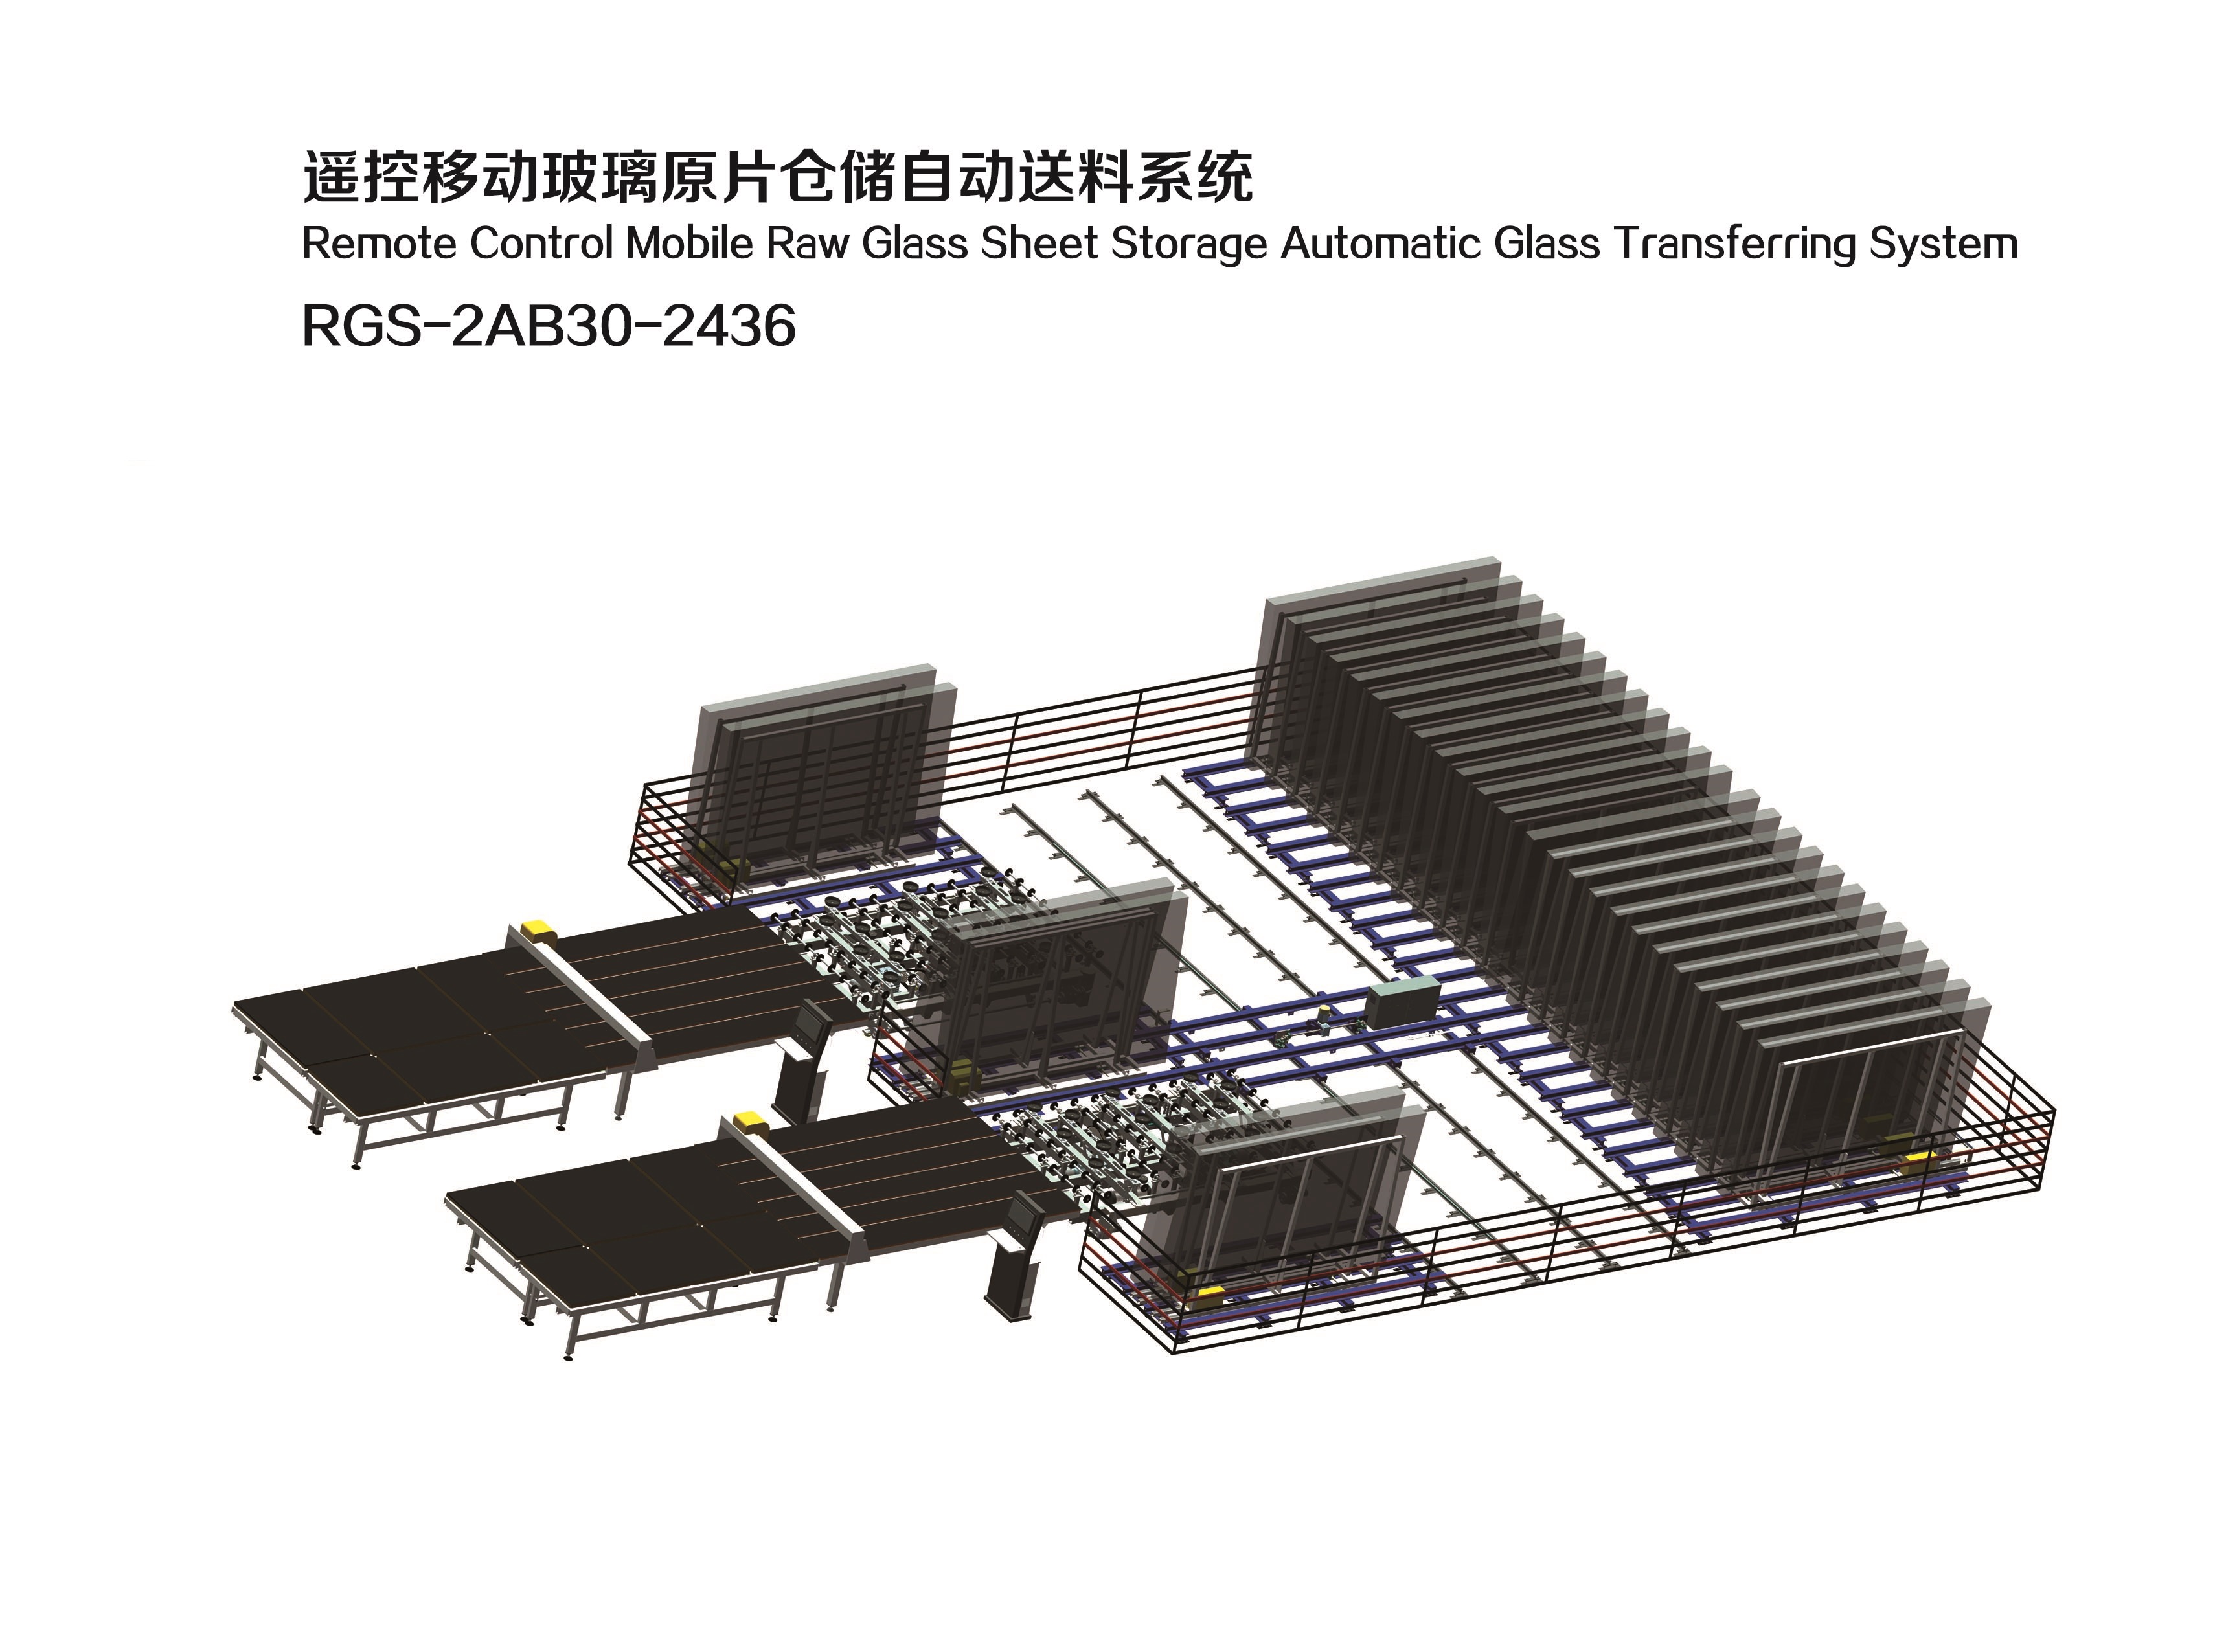 China Gold Supplier for Container U Shape Glass Loader -
 Automatic Glass Sheet Shuttle Storage System,Automatic Glass Sheet Storage Loading Cutting System,Smart Automatic Glass Sheet Storage Loadi...